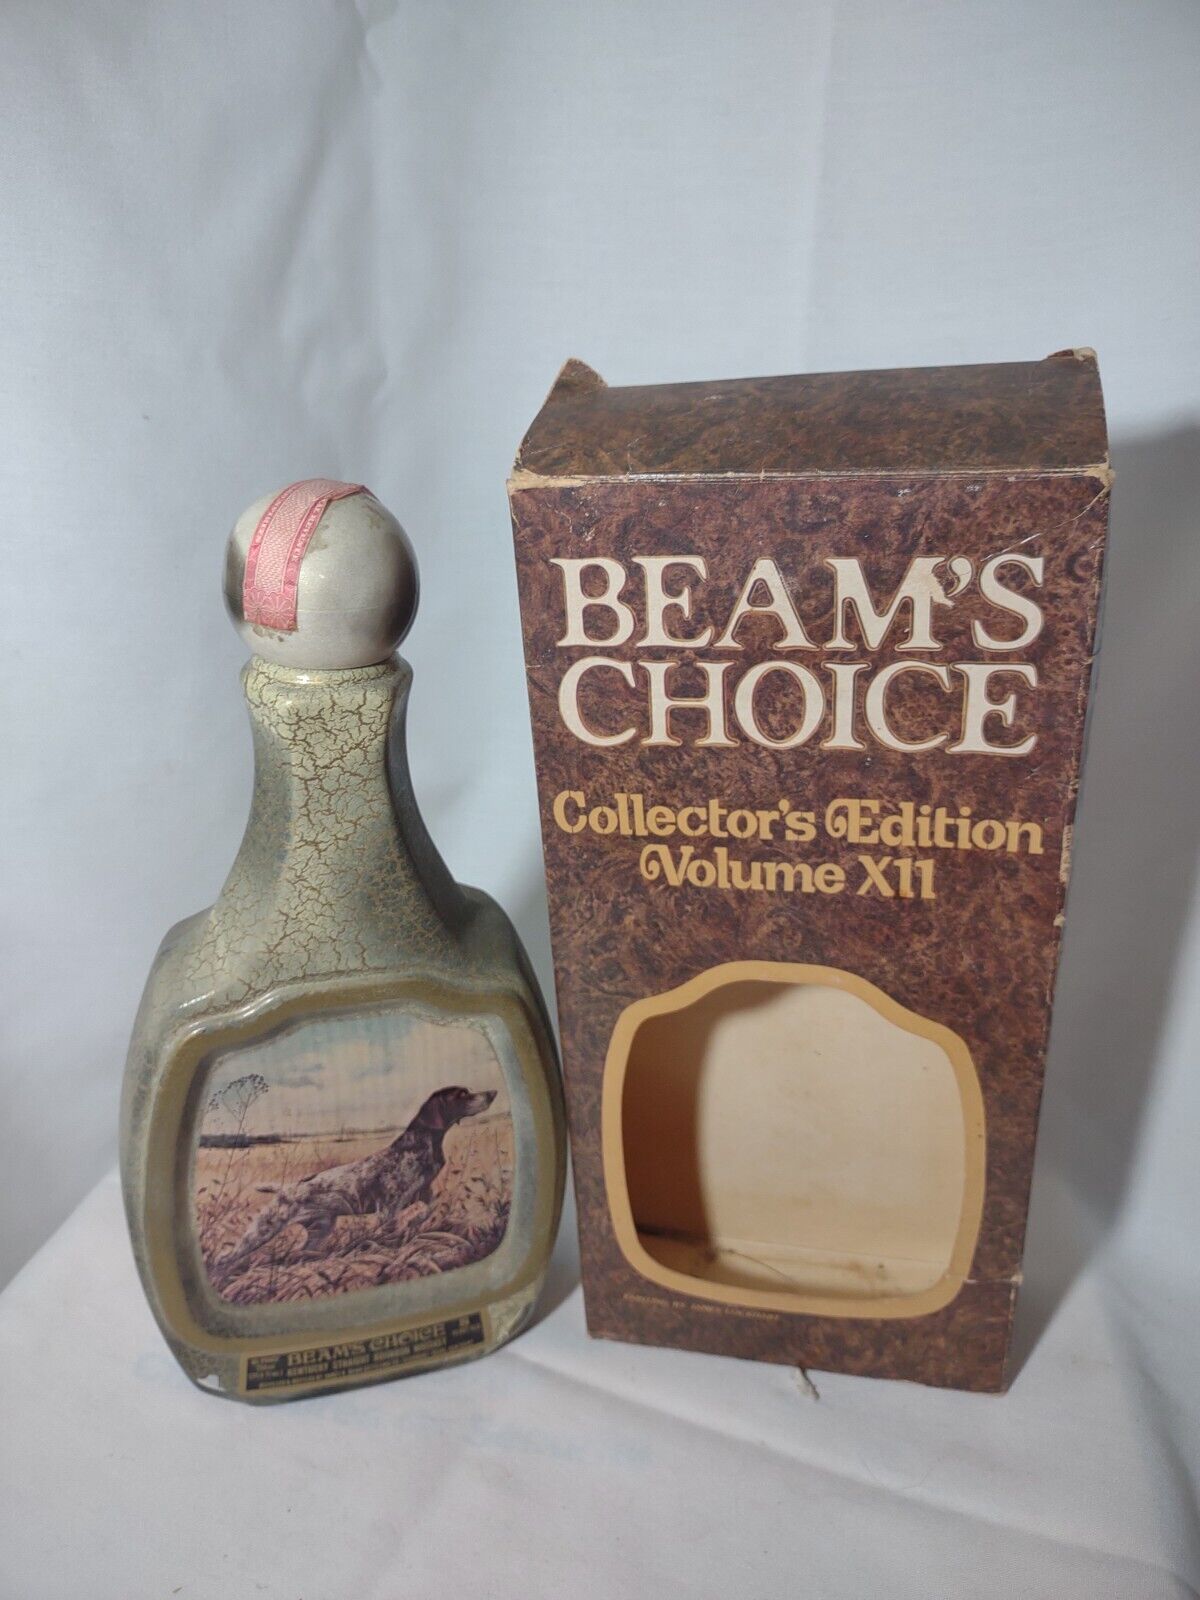 VTG JIM BEAM'S COLLECTOR'S EDITION VOLUME XII BEAM'S CHOICE EMPTY